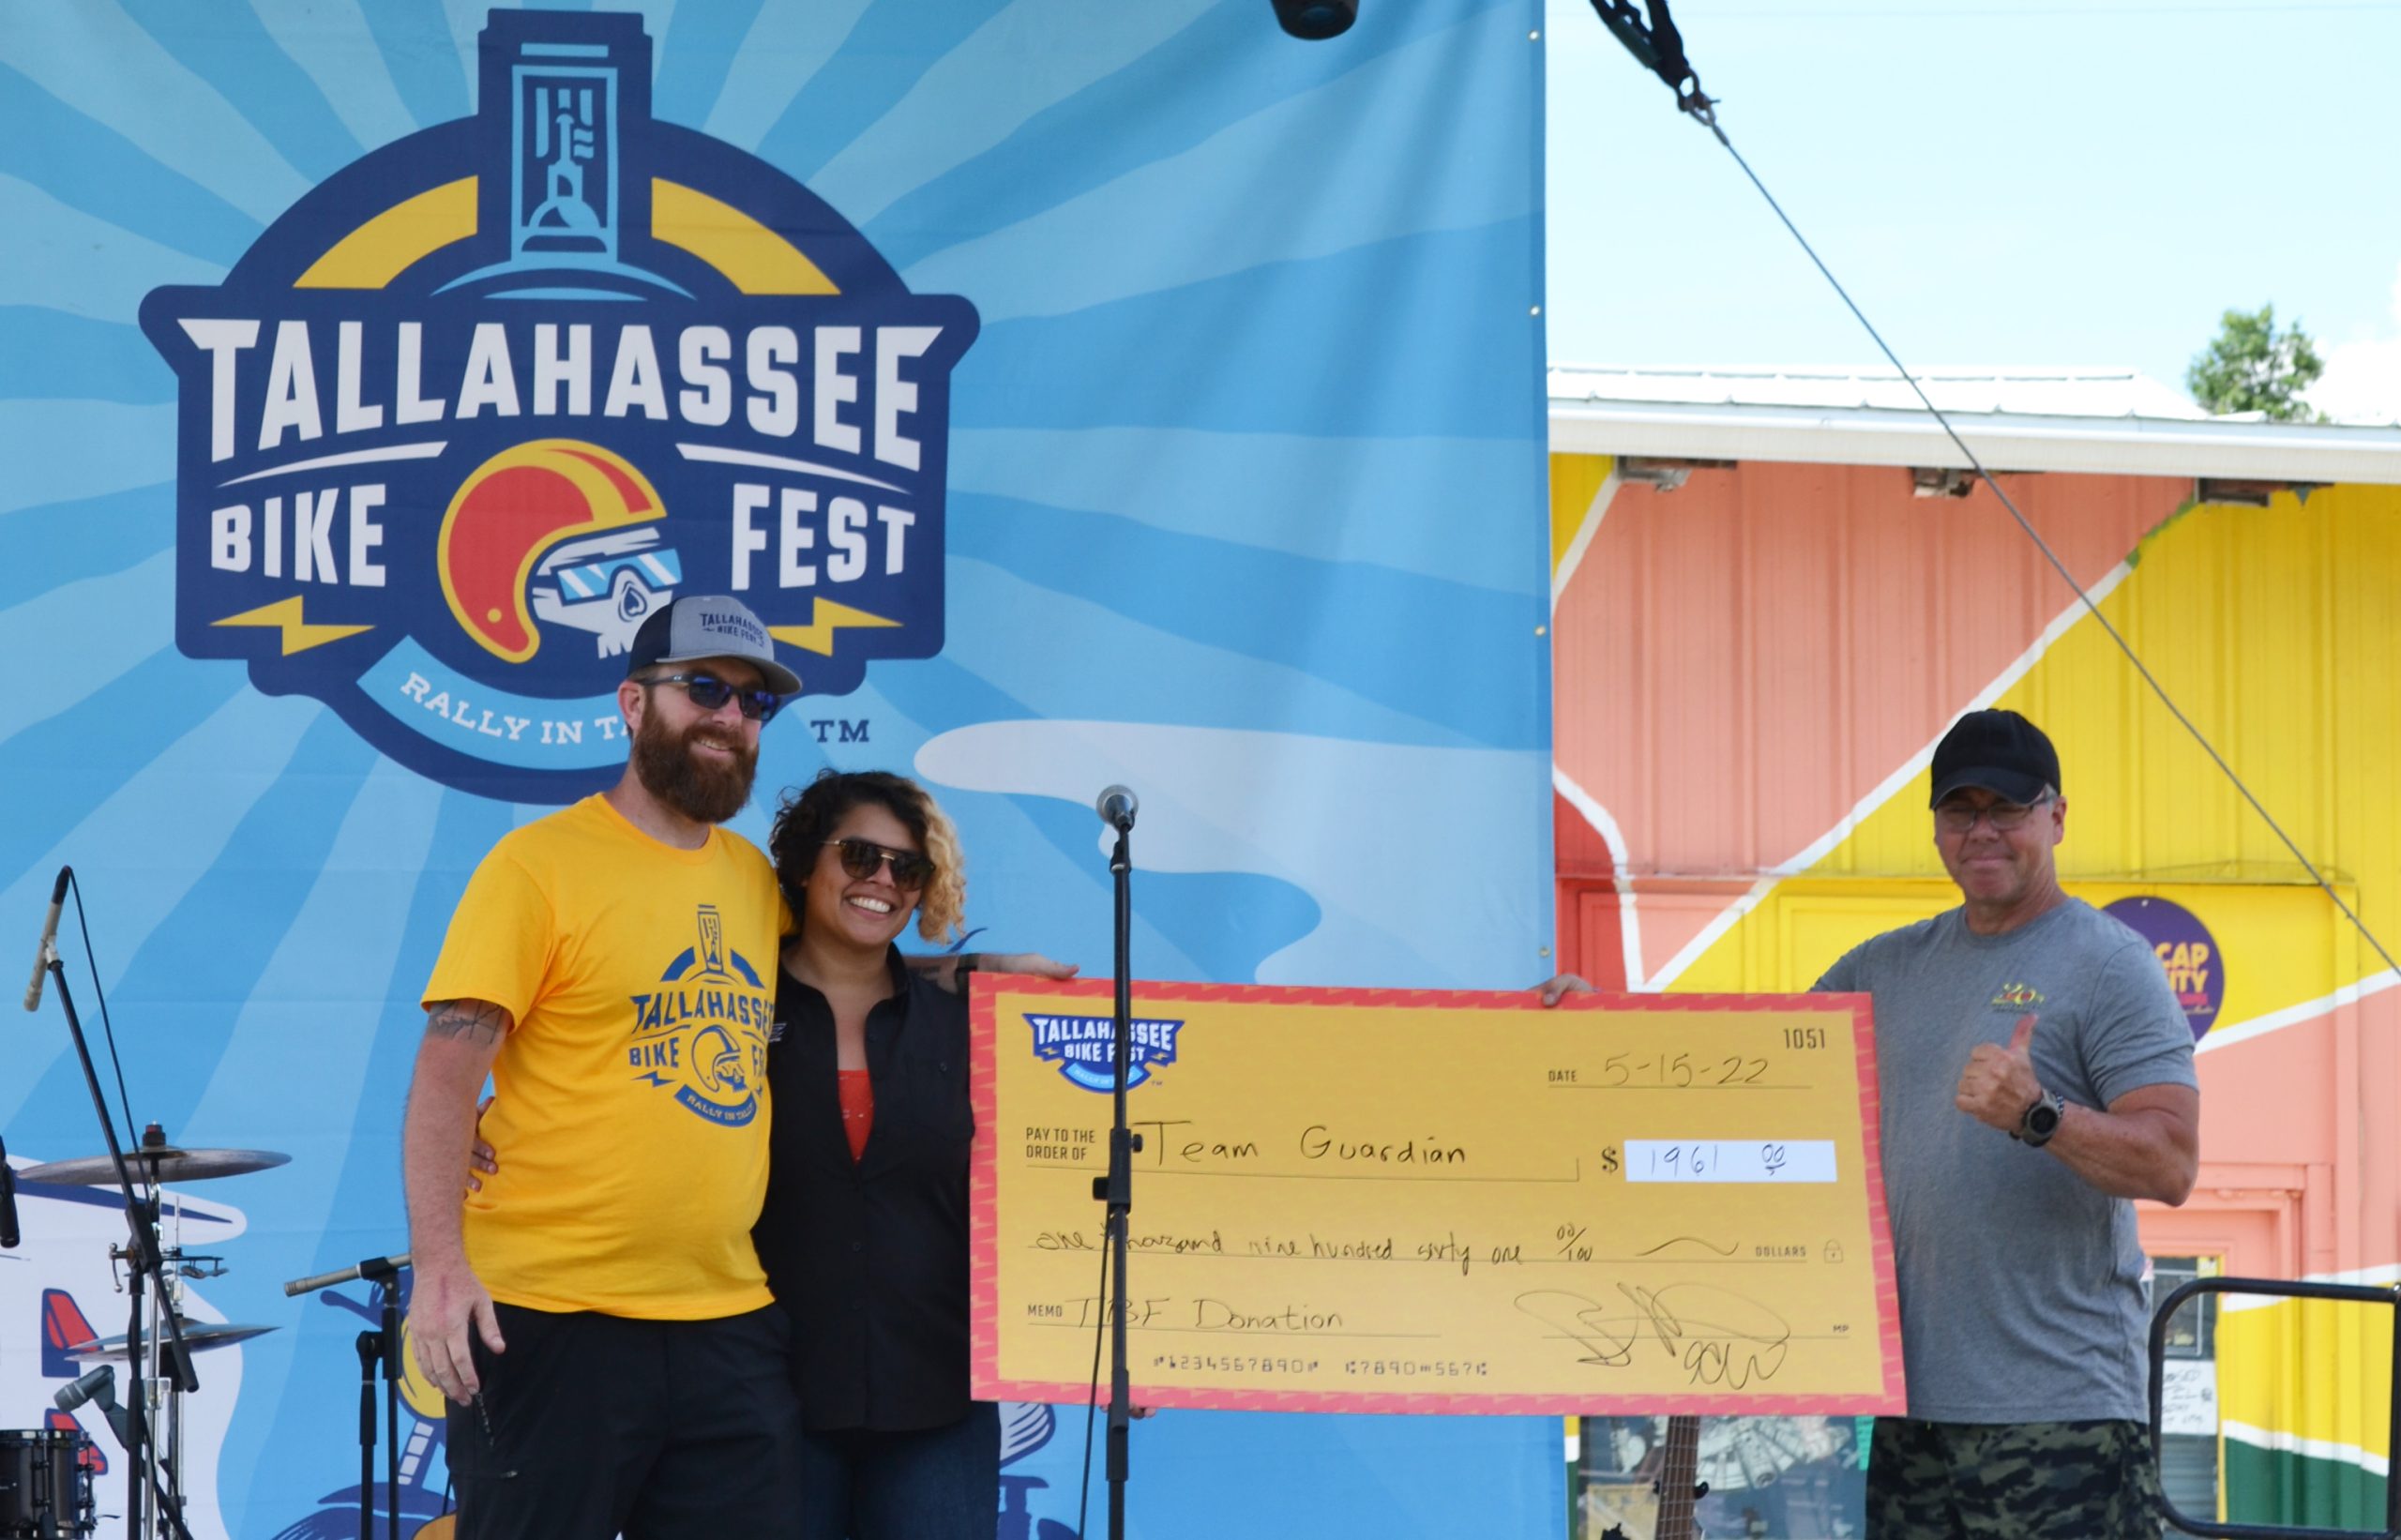 Giving back to the community has always been an important part of Giavona’s commitment for Tally Bike Fest. Last year the event gave over $1,000 to local charities and expects to do even more than that this year.